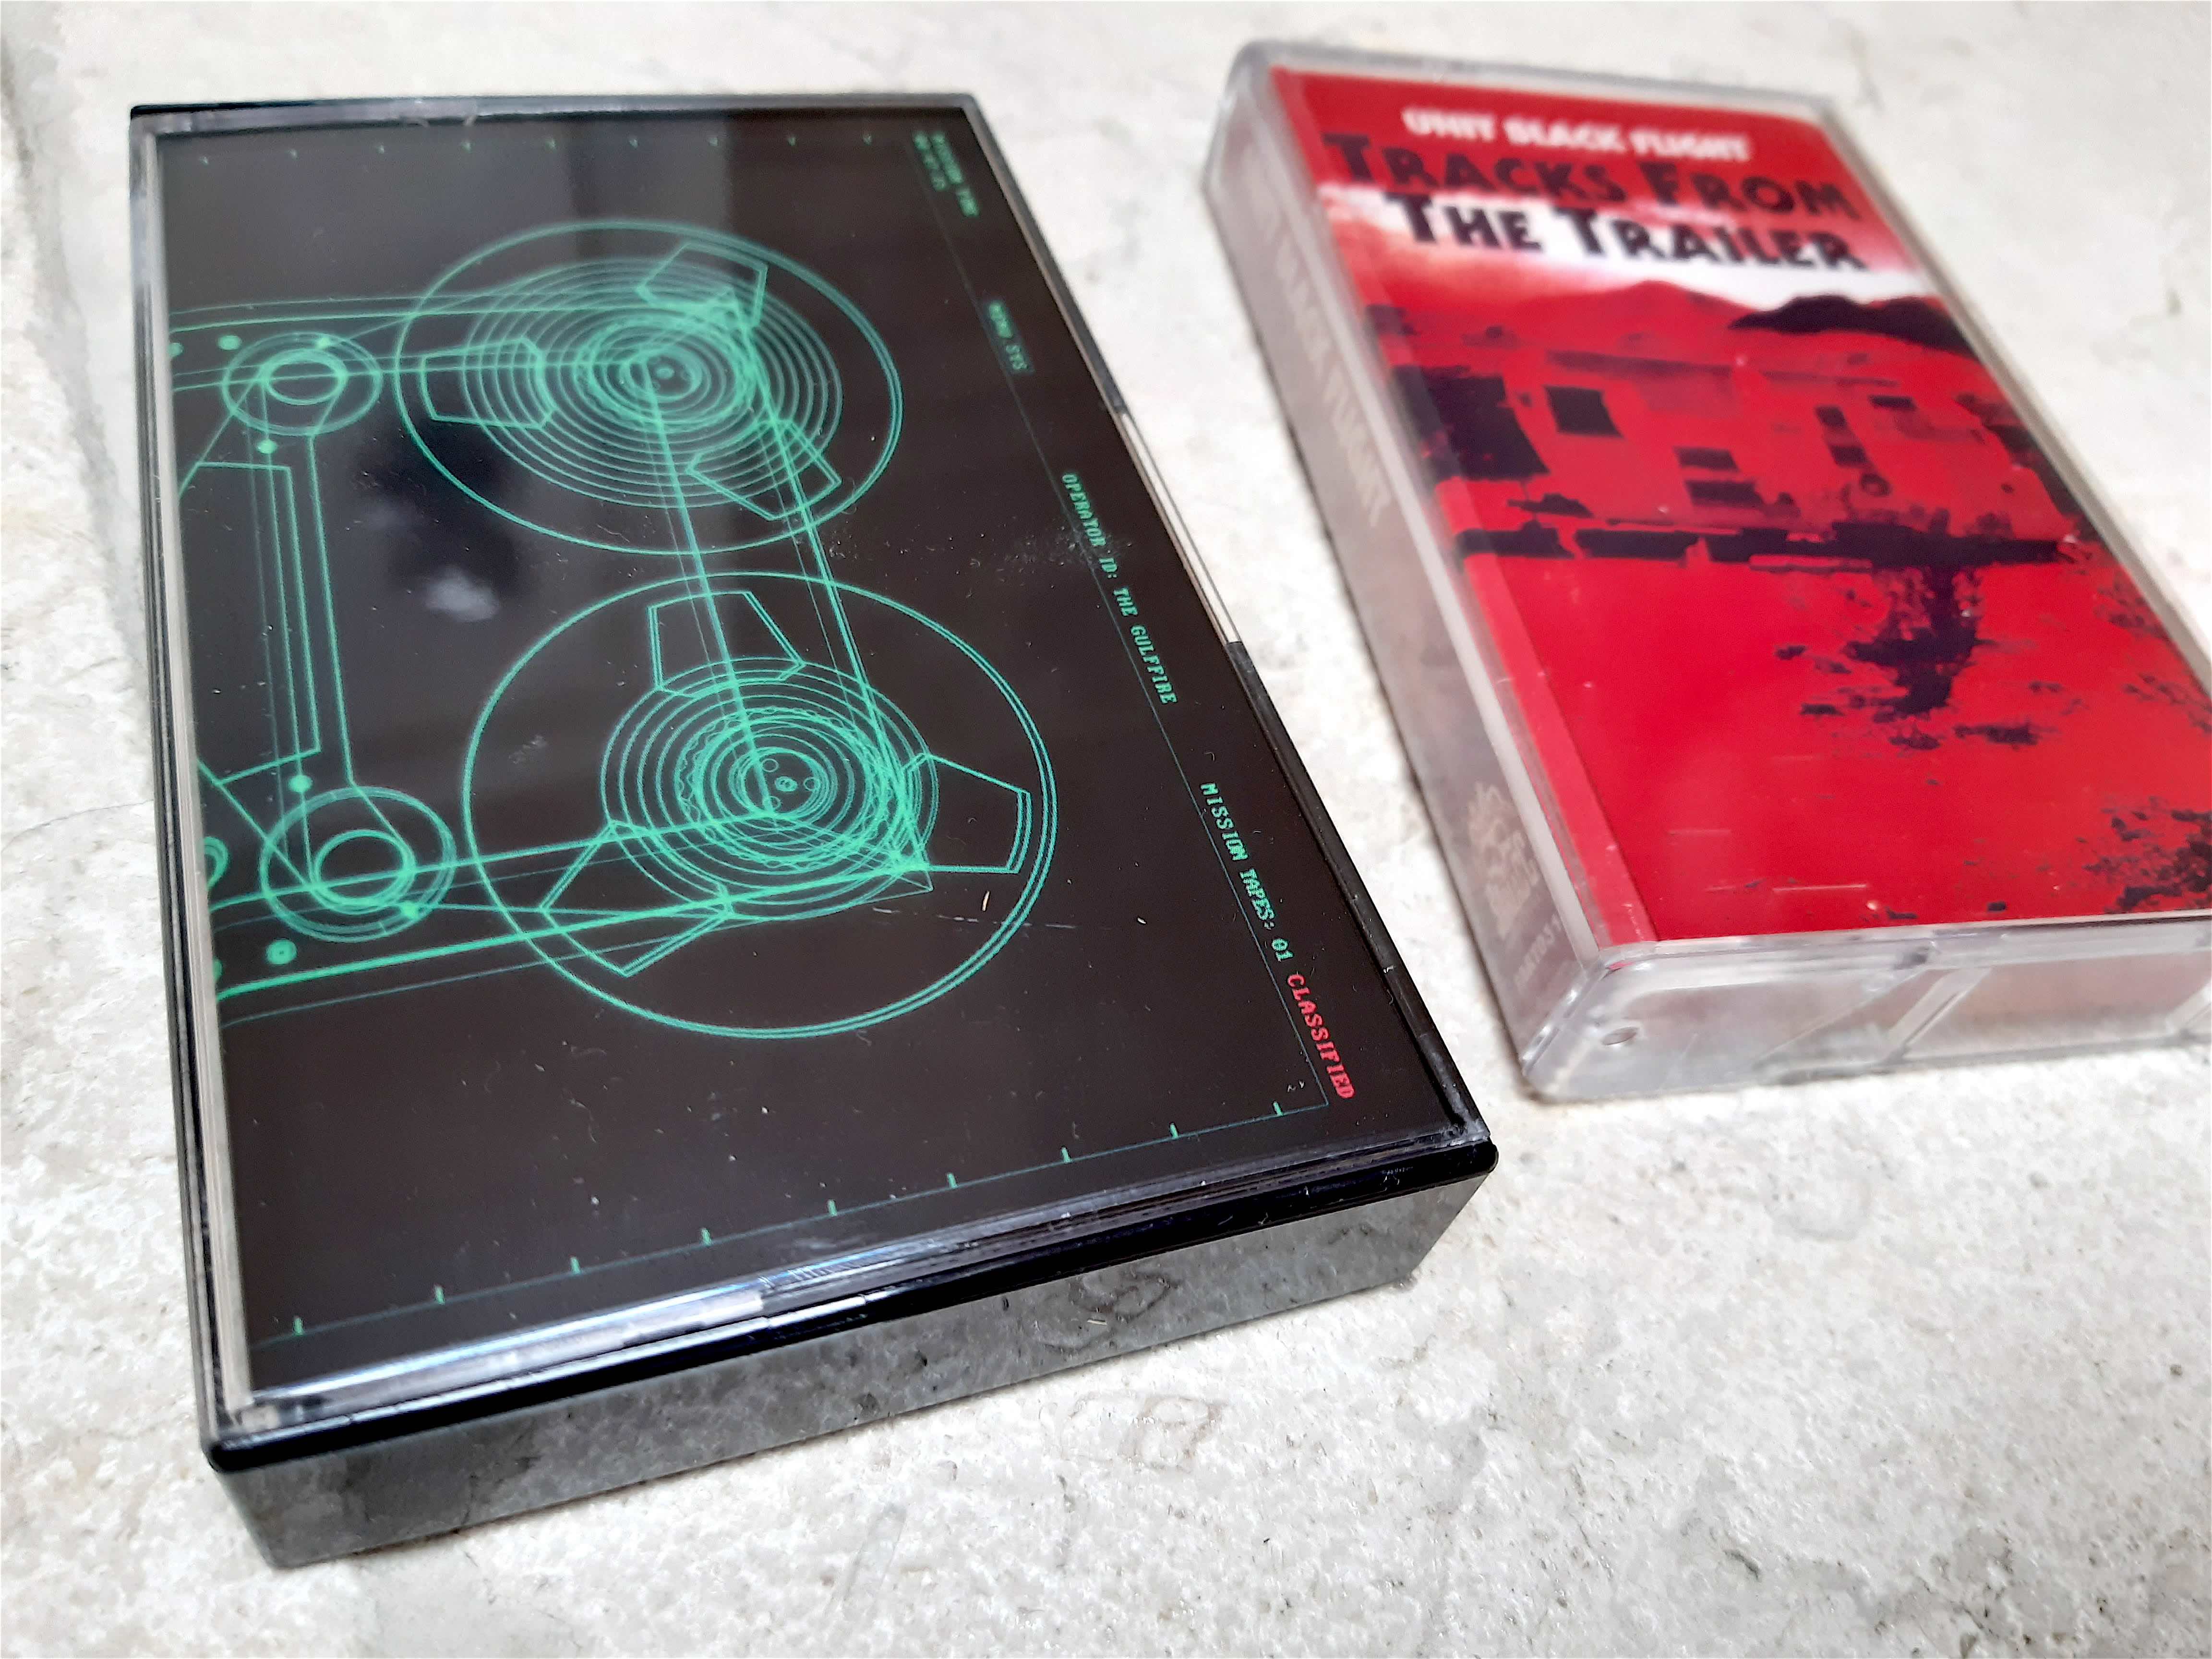 THE GULFFIRE - MISSION TAPES VOL. I Fonolith copy.jpg